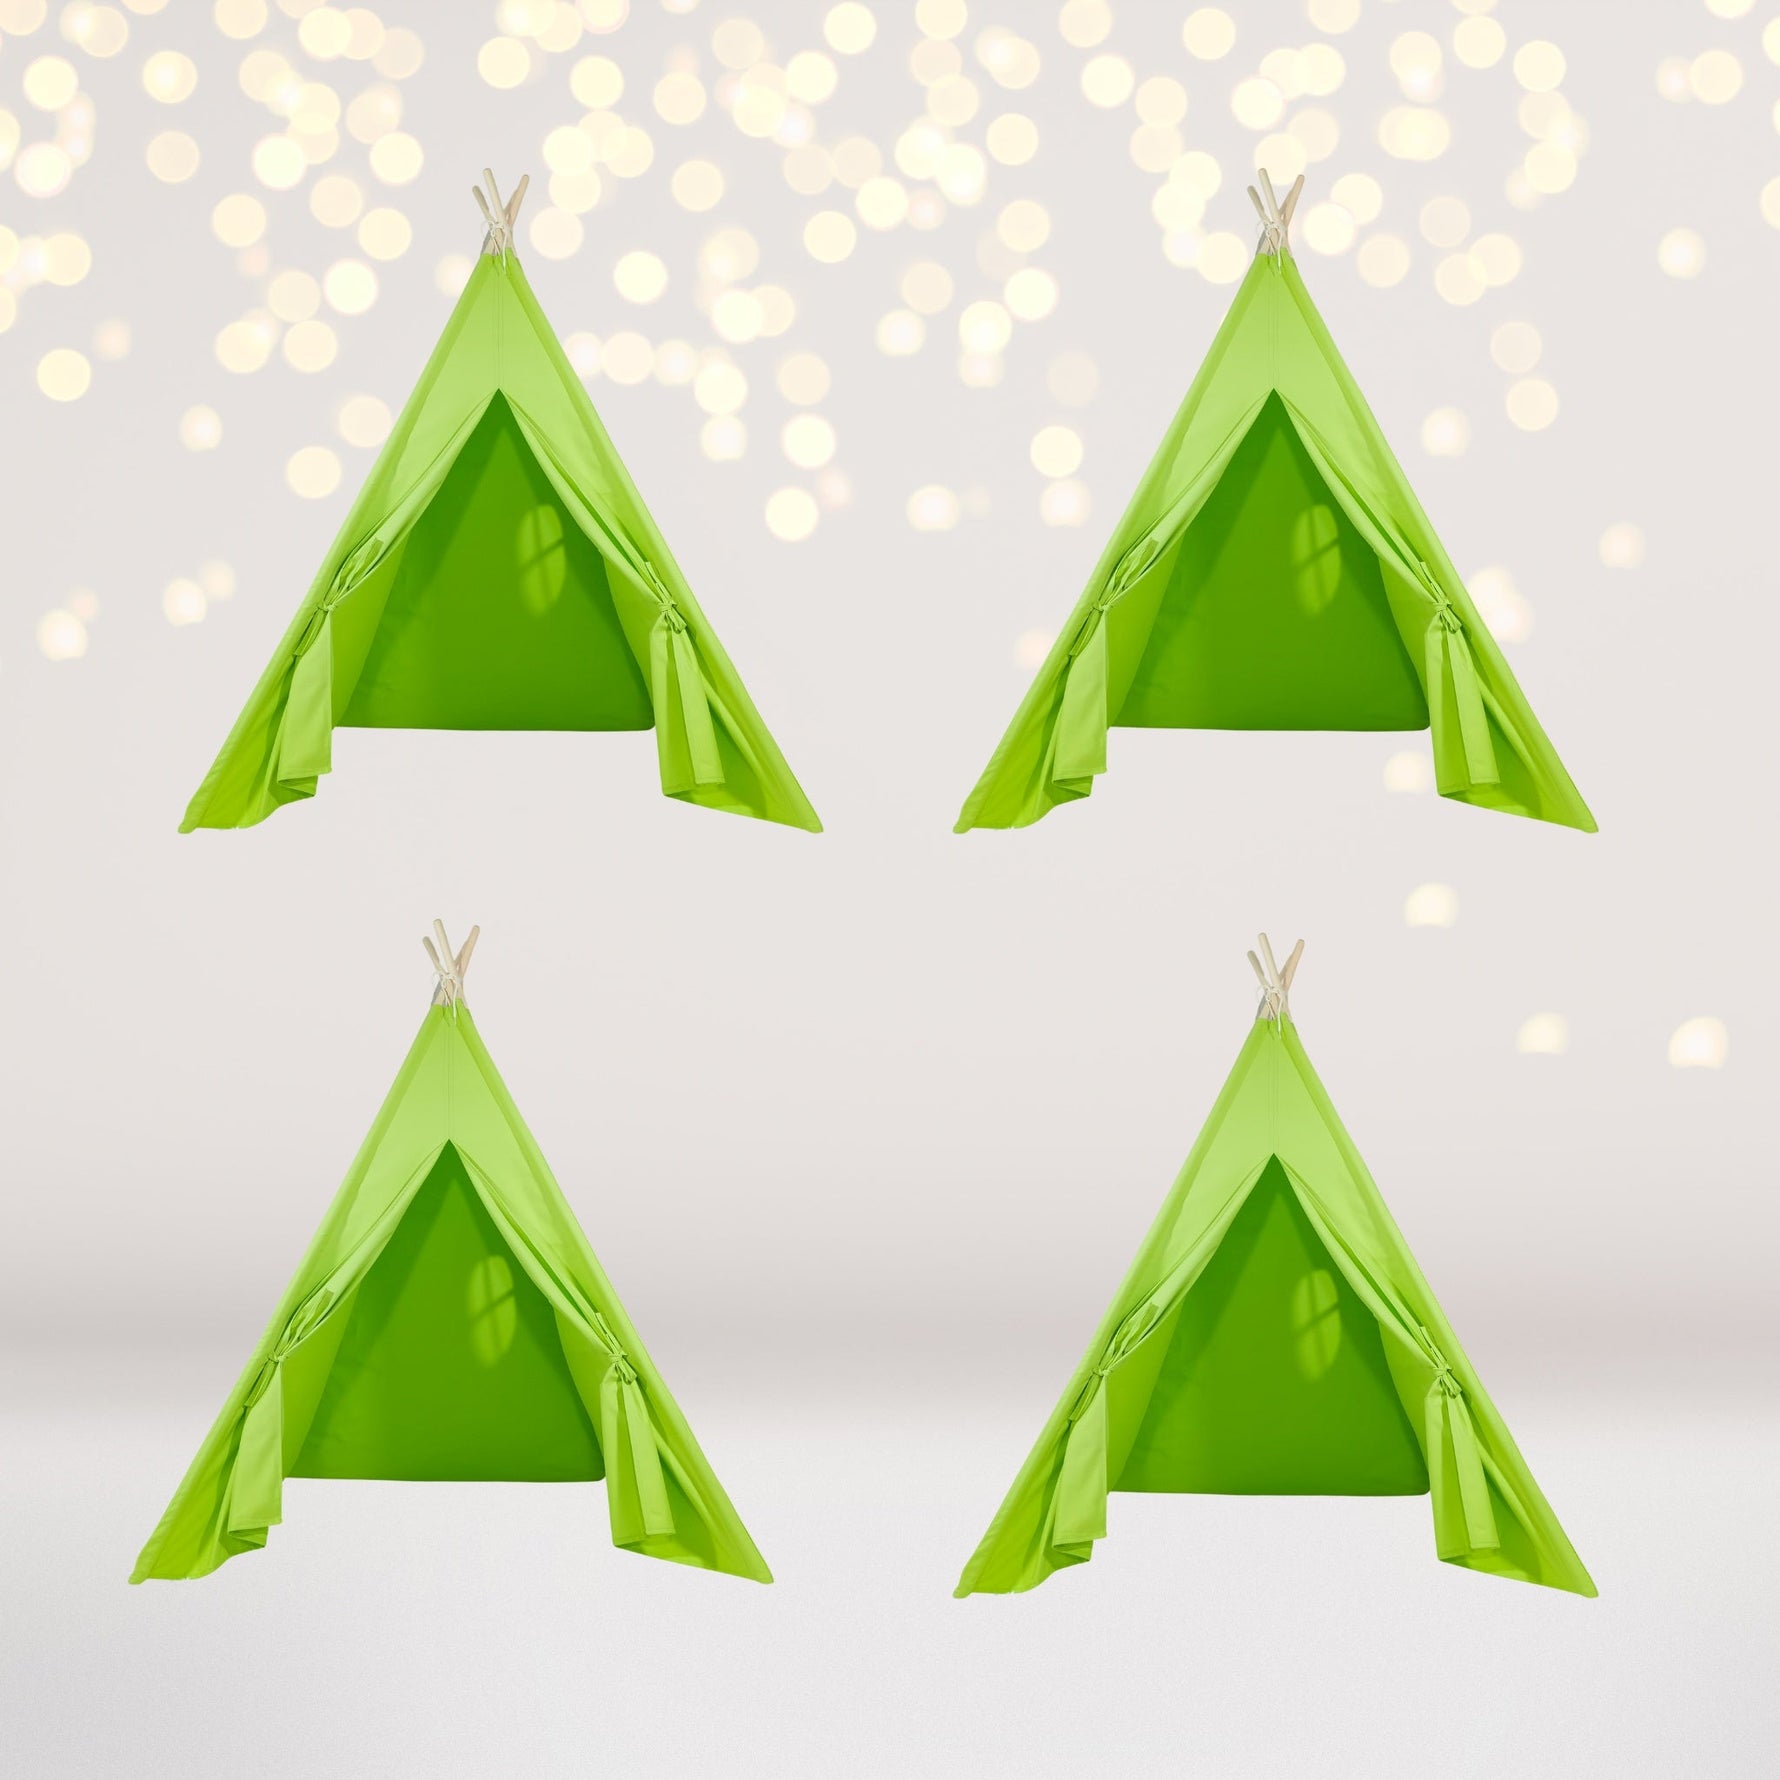 4 pack Kids Sleepover Tents-LUXE Kids Teepee Tent with Lights-Party Pack Lime